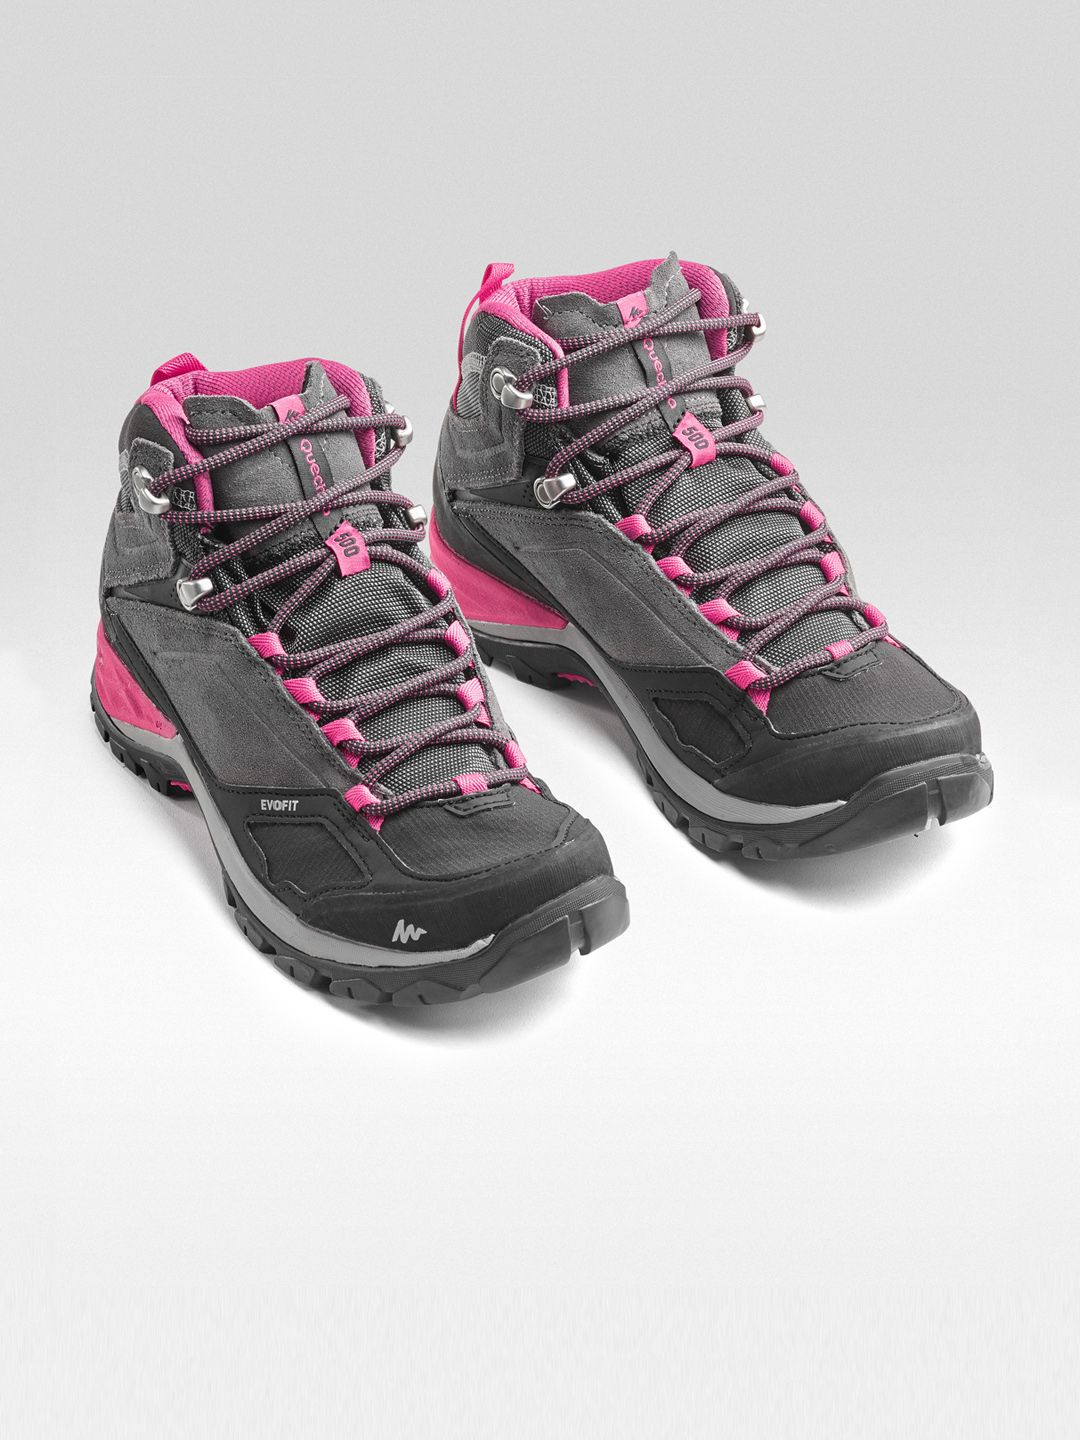 Quechua By Decathlon Women Black Leather Mid-Top Waterproof Hiking Shoes Price in India